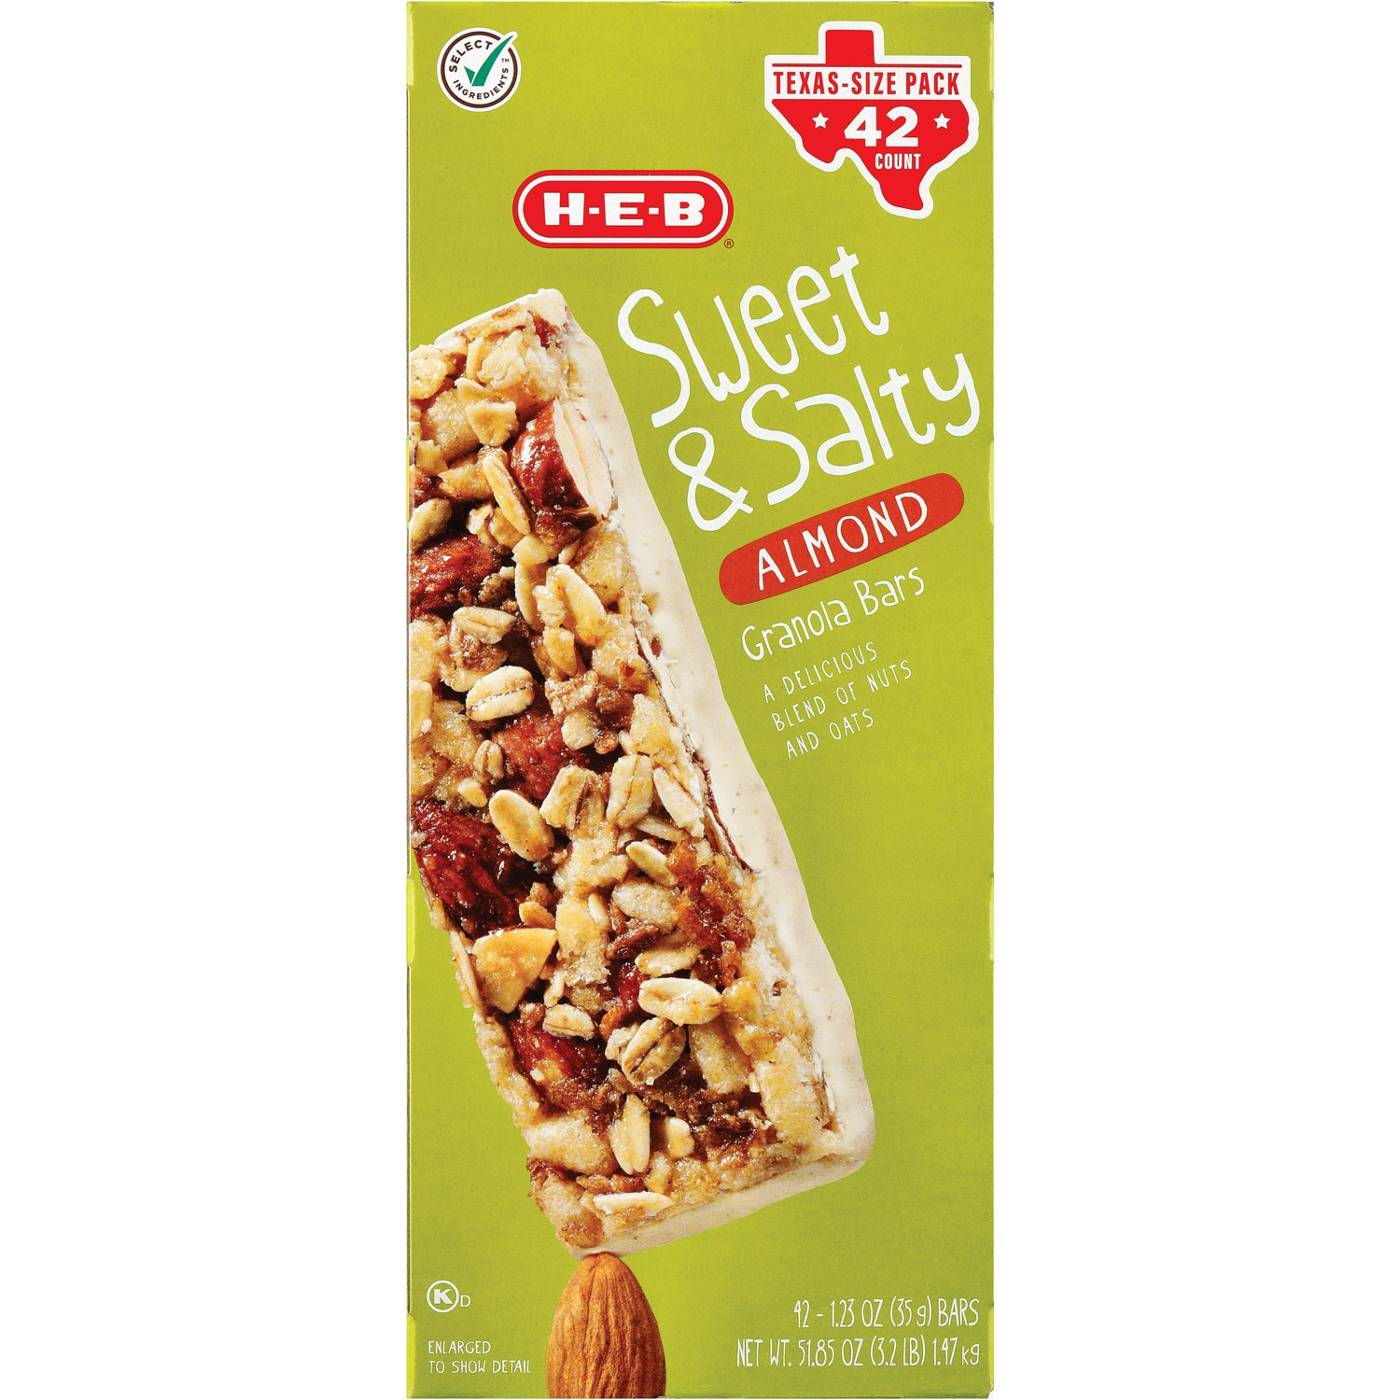 H-E-B Sweet & Salty Almond Granola Bars - Texas-Size Pack; image 1 of 2